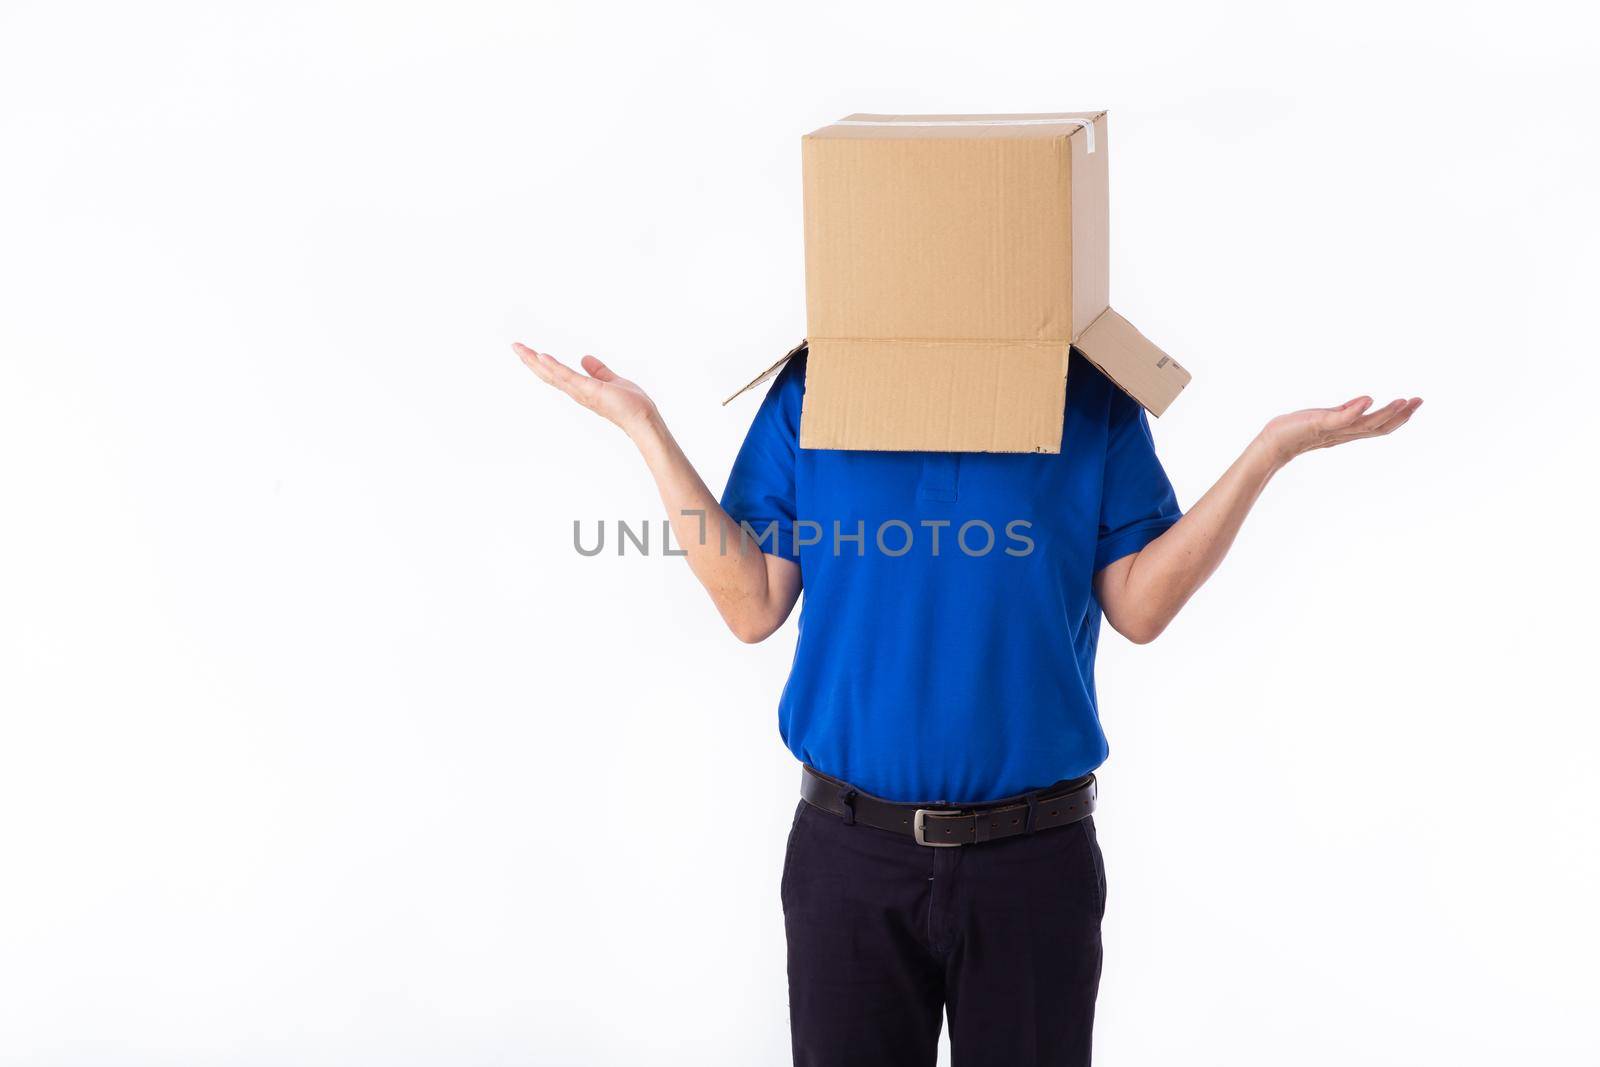 man in a bluer T-shirt with a cardboard box on his head makes a gesture with his hands isolated on white background